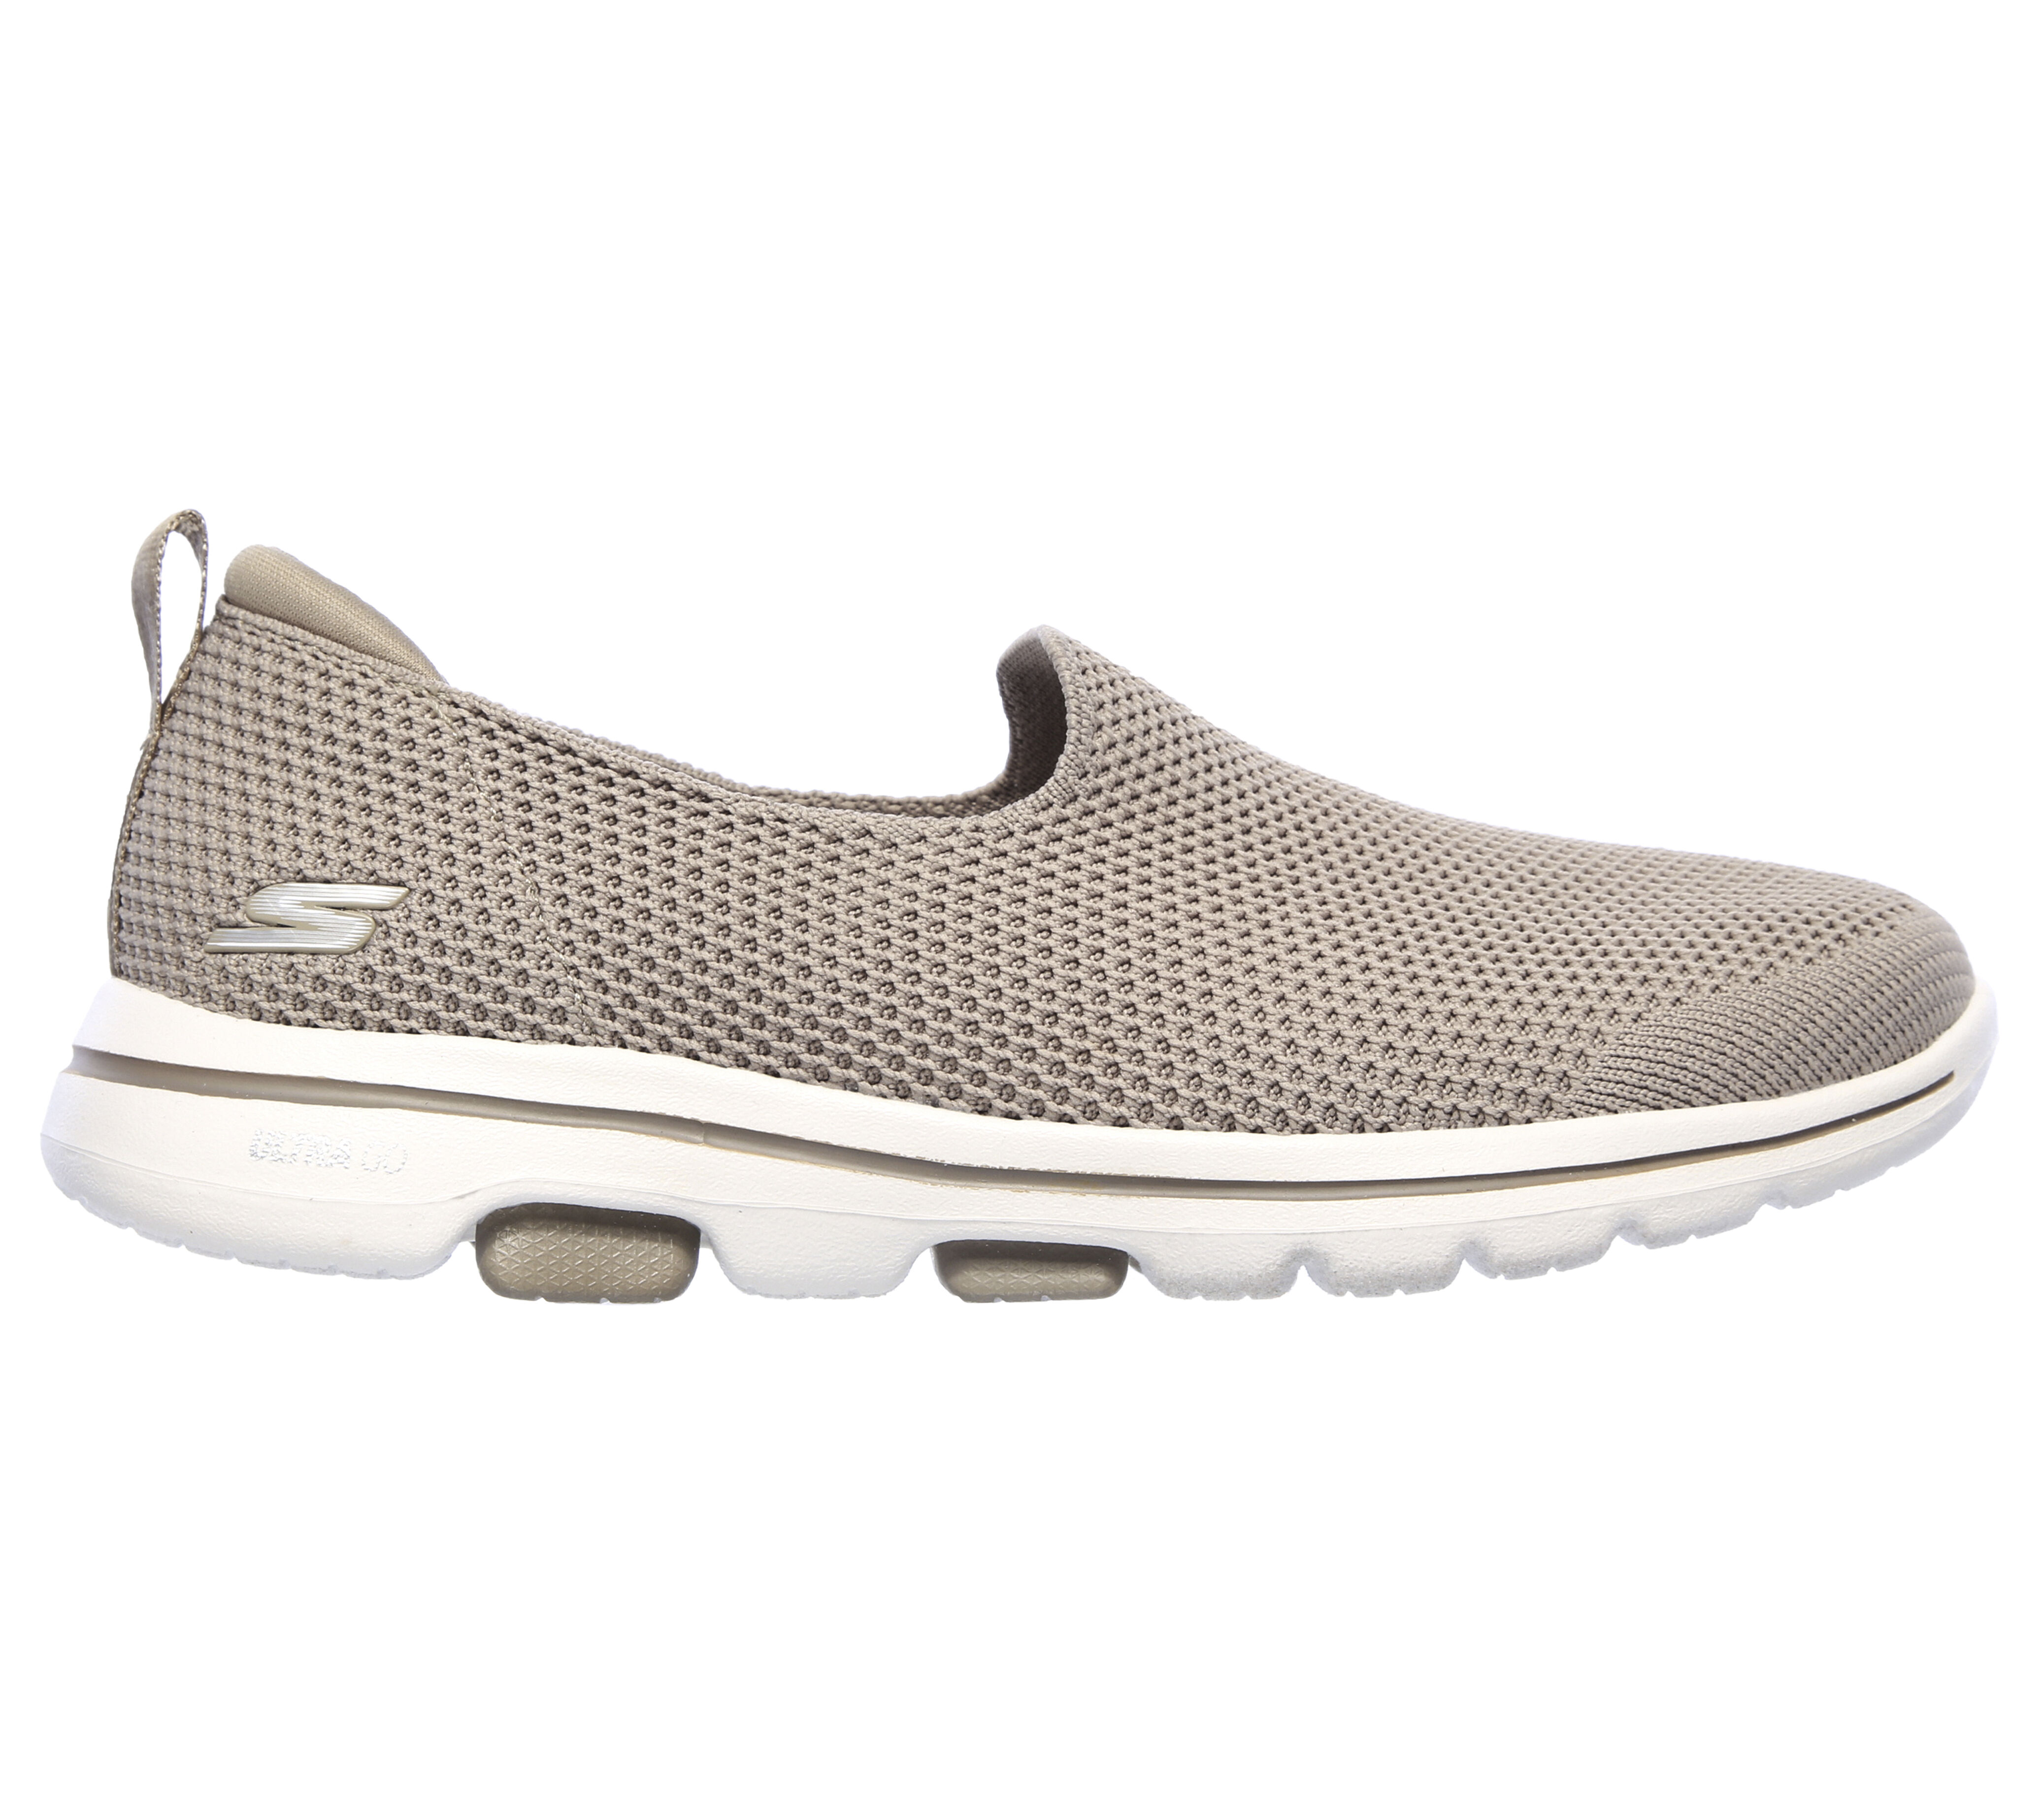 skechers shoes online usa